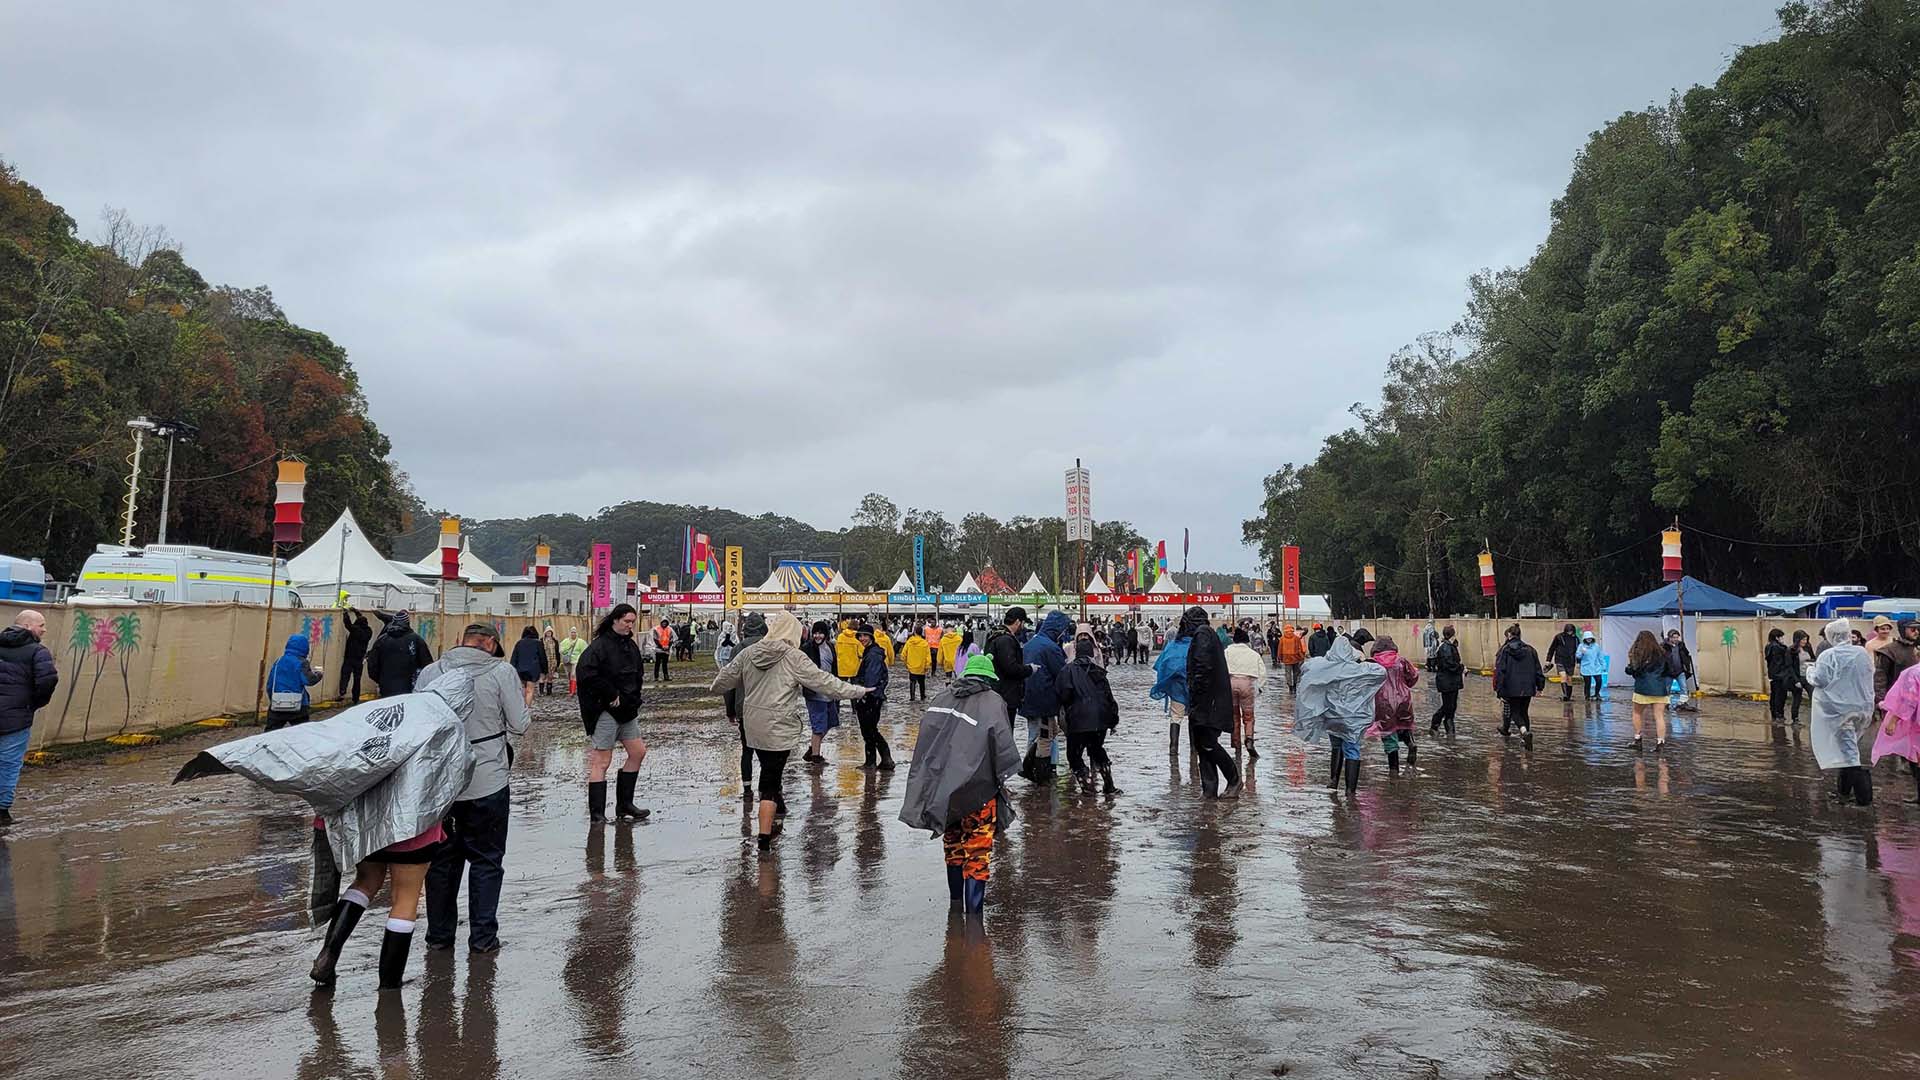 "Splendour in the Pool": Wet Weather Is Causing Chaos, Mud Pits and a Damp Time at SITG's Big Return